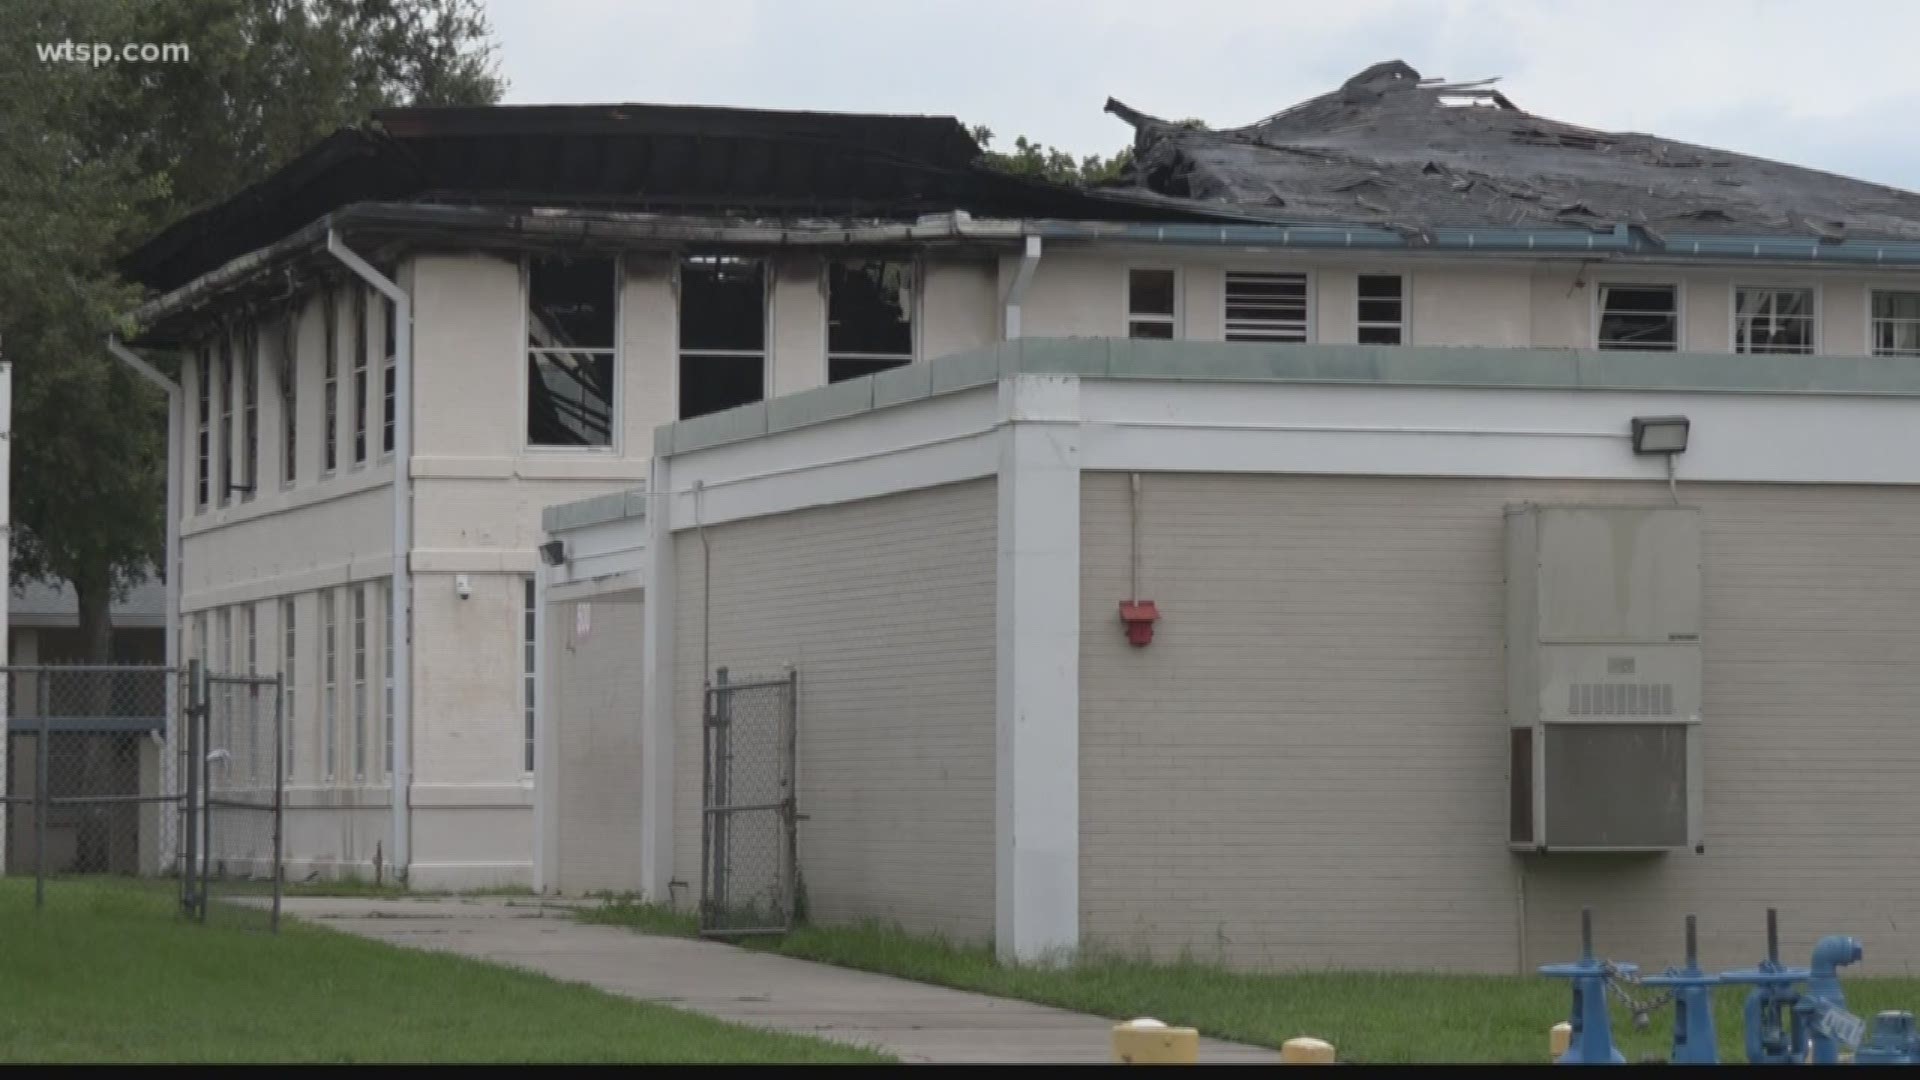 Lightning injured 8 people at Clearwater Beach and destroyed a boat in Gulfport. It is also likely the cause of a fire at McLane Middle School. https://on.wtsp.com/2JH8PwJ